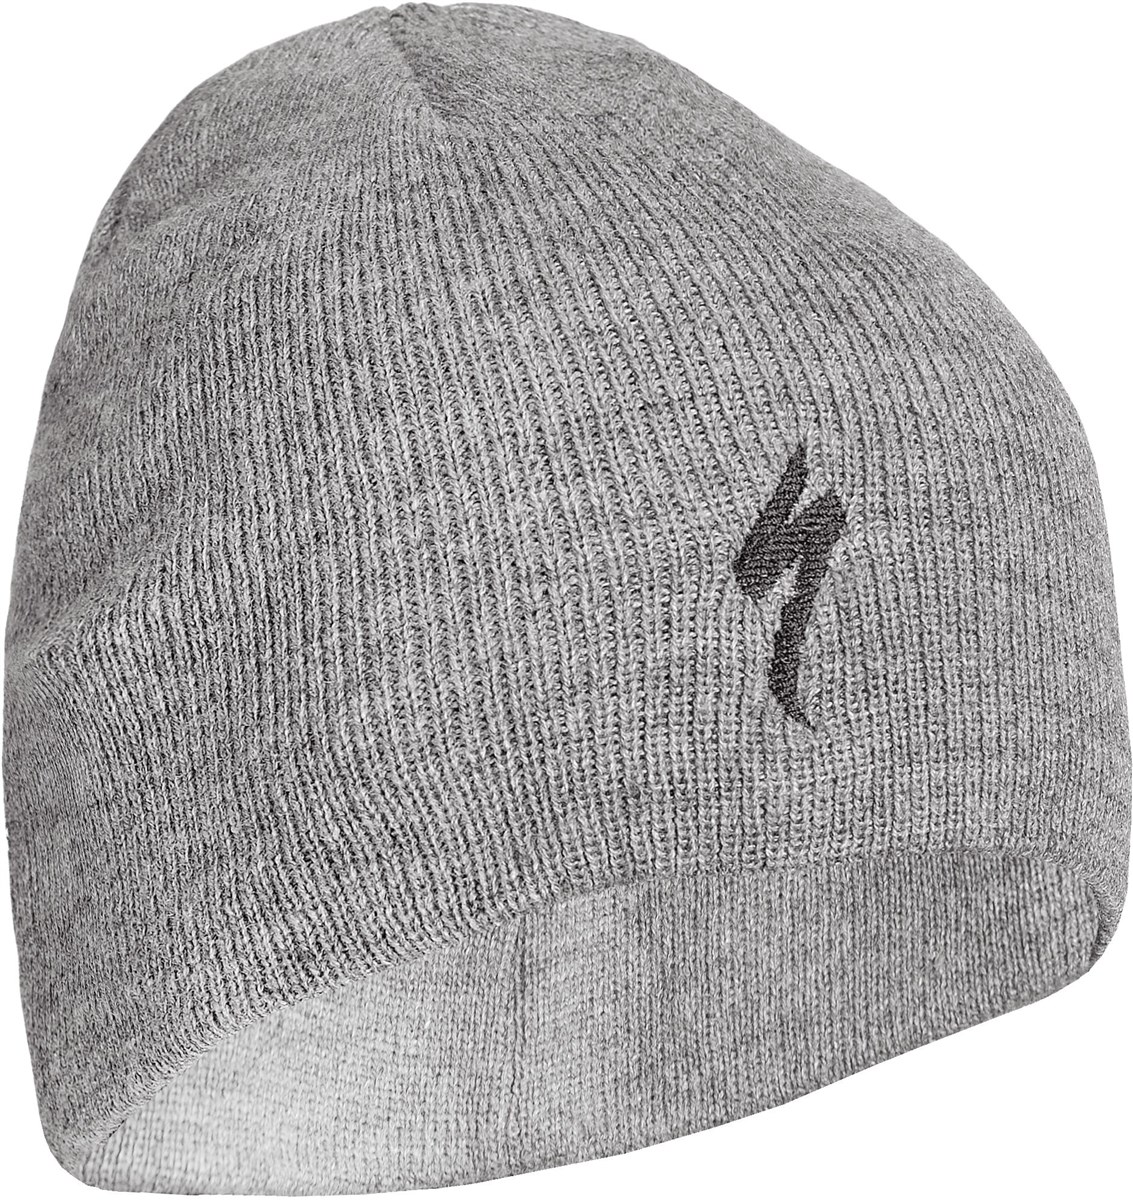 Specialized Beanie Hat product image